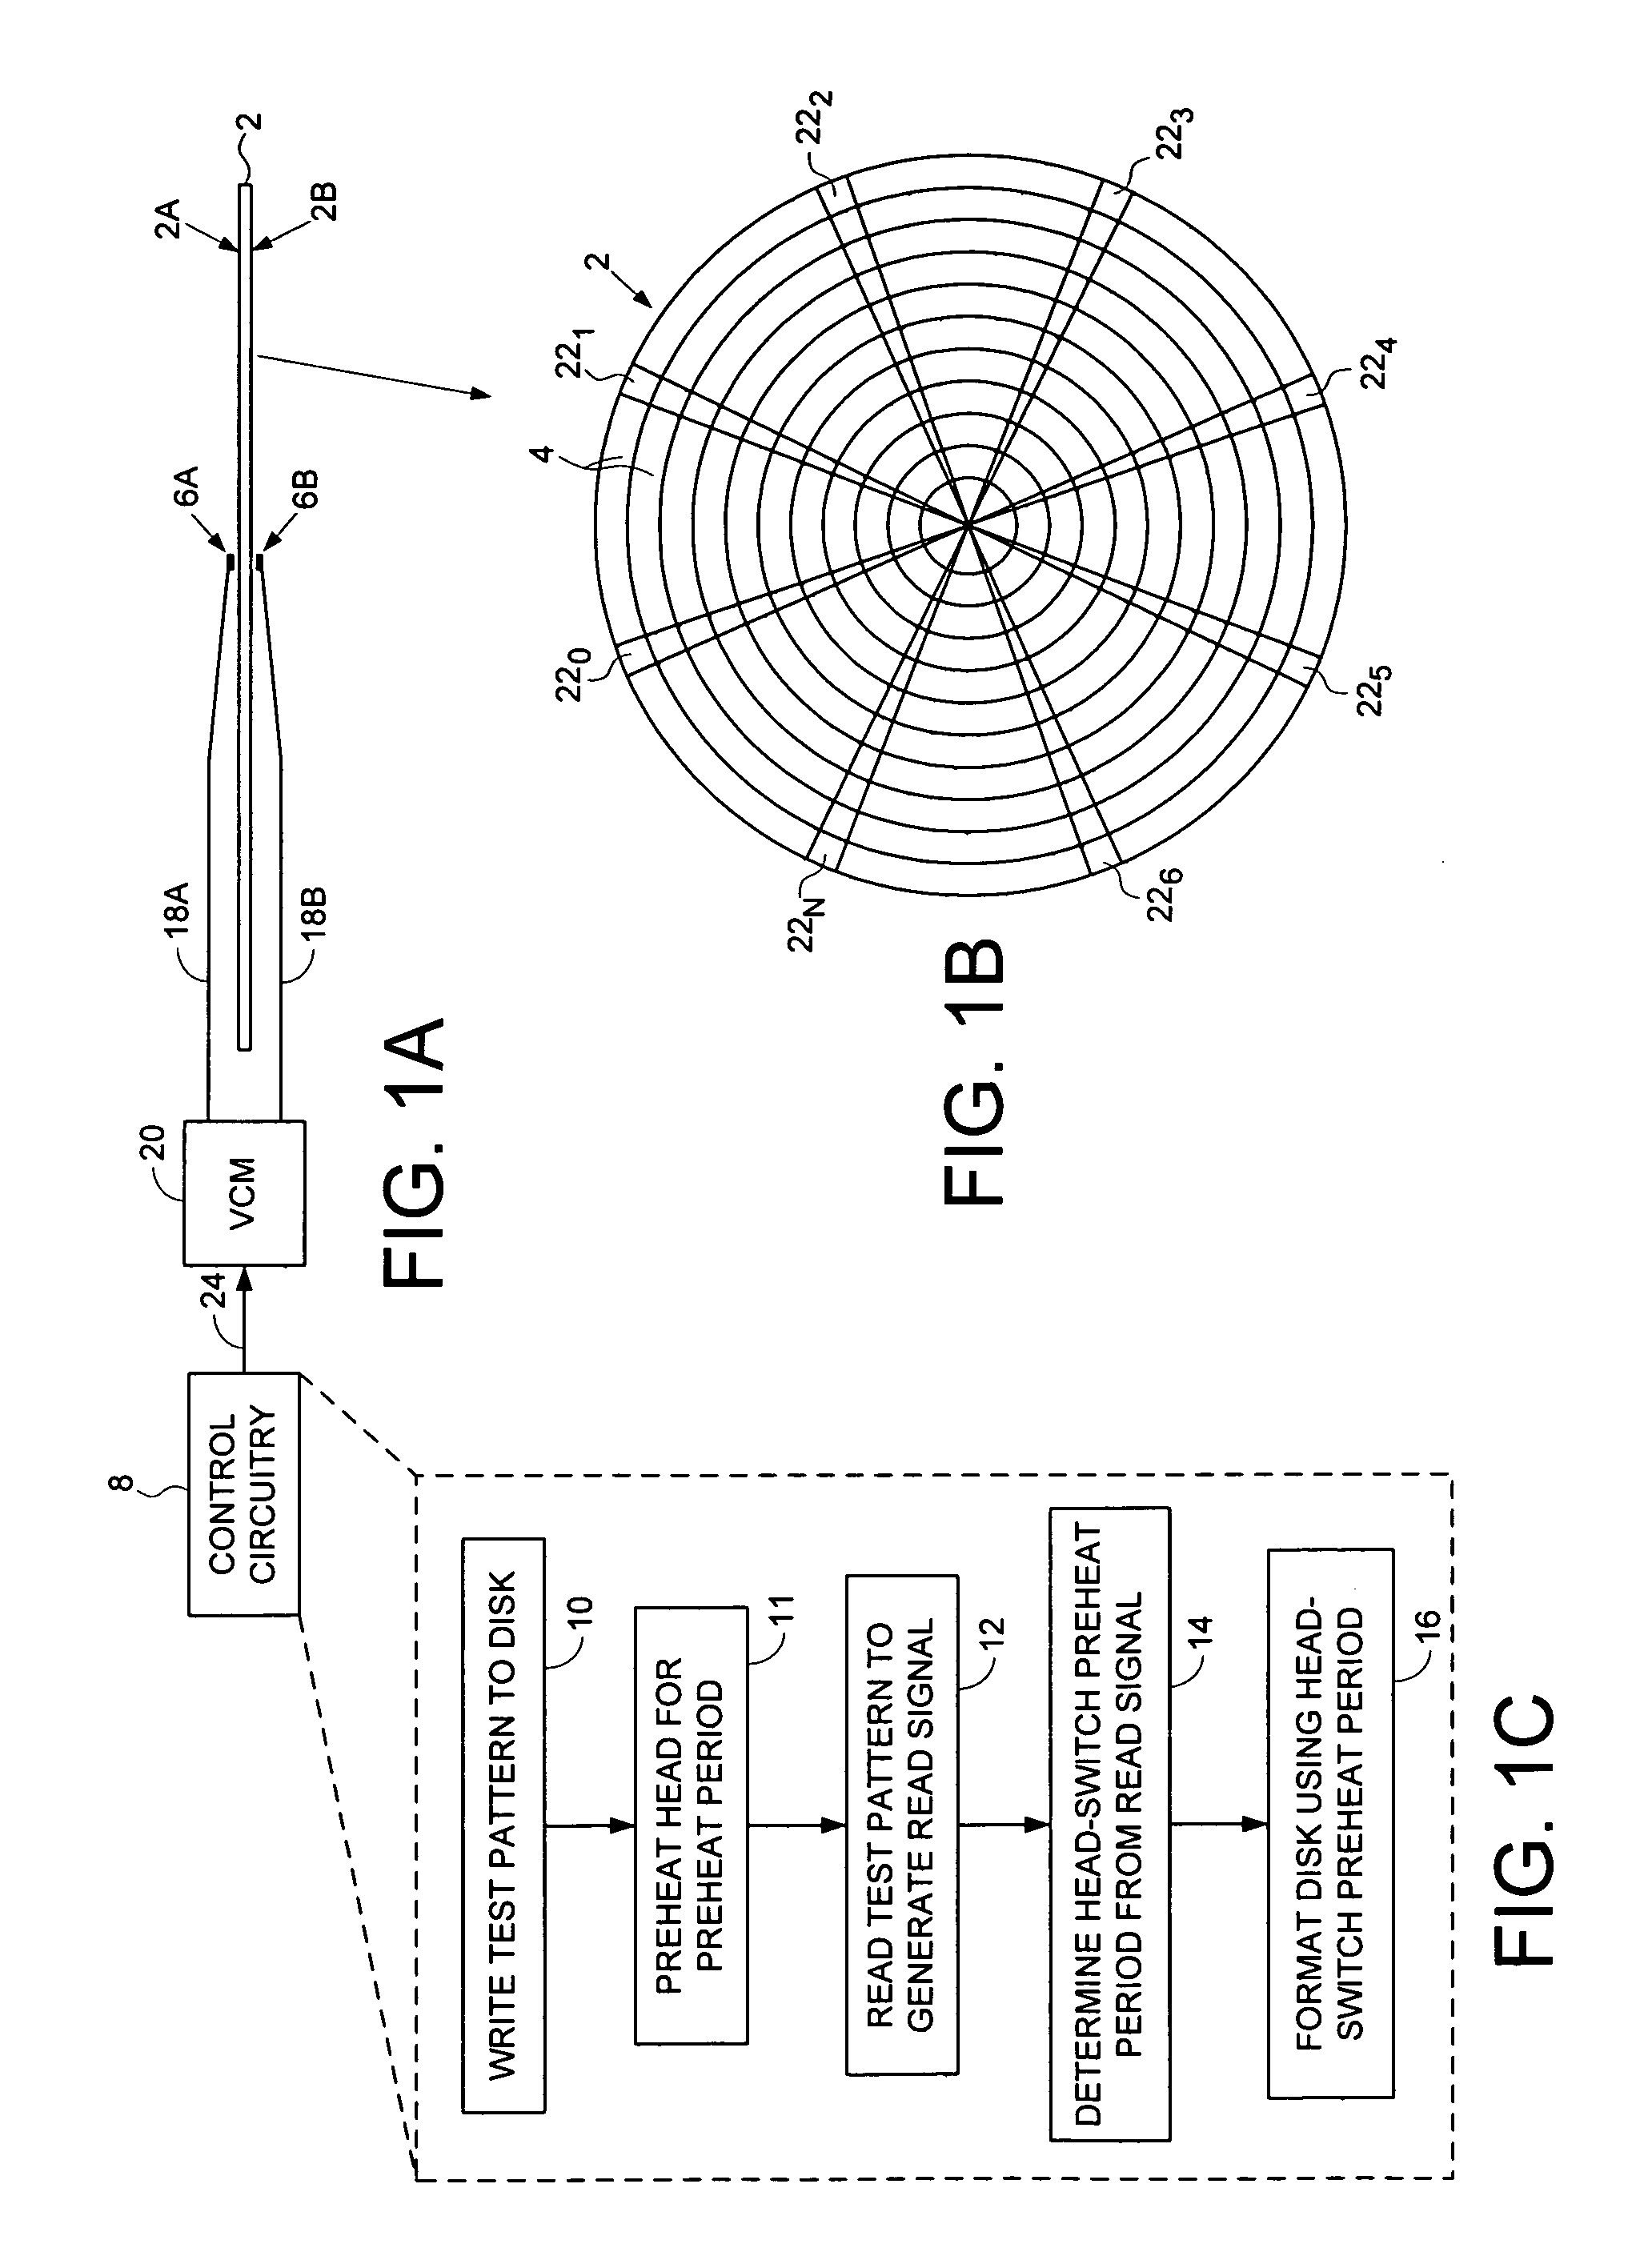 Disk drive determining a head-switch preheat period used to format a disk